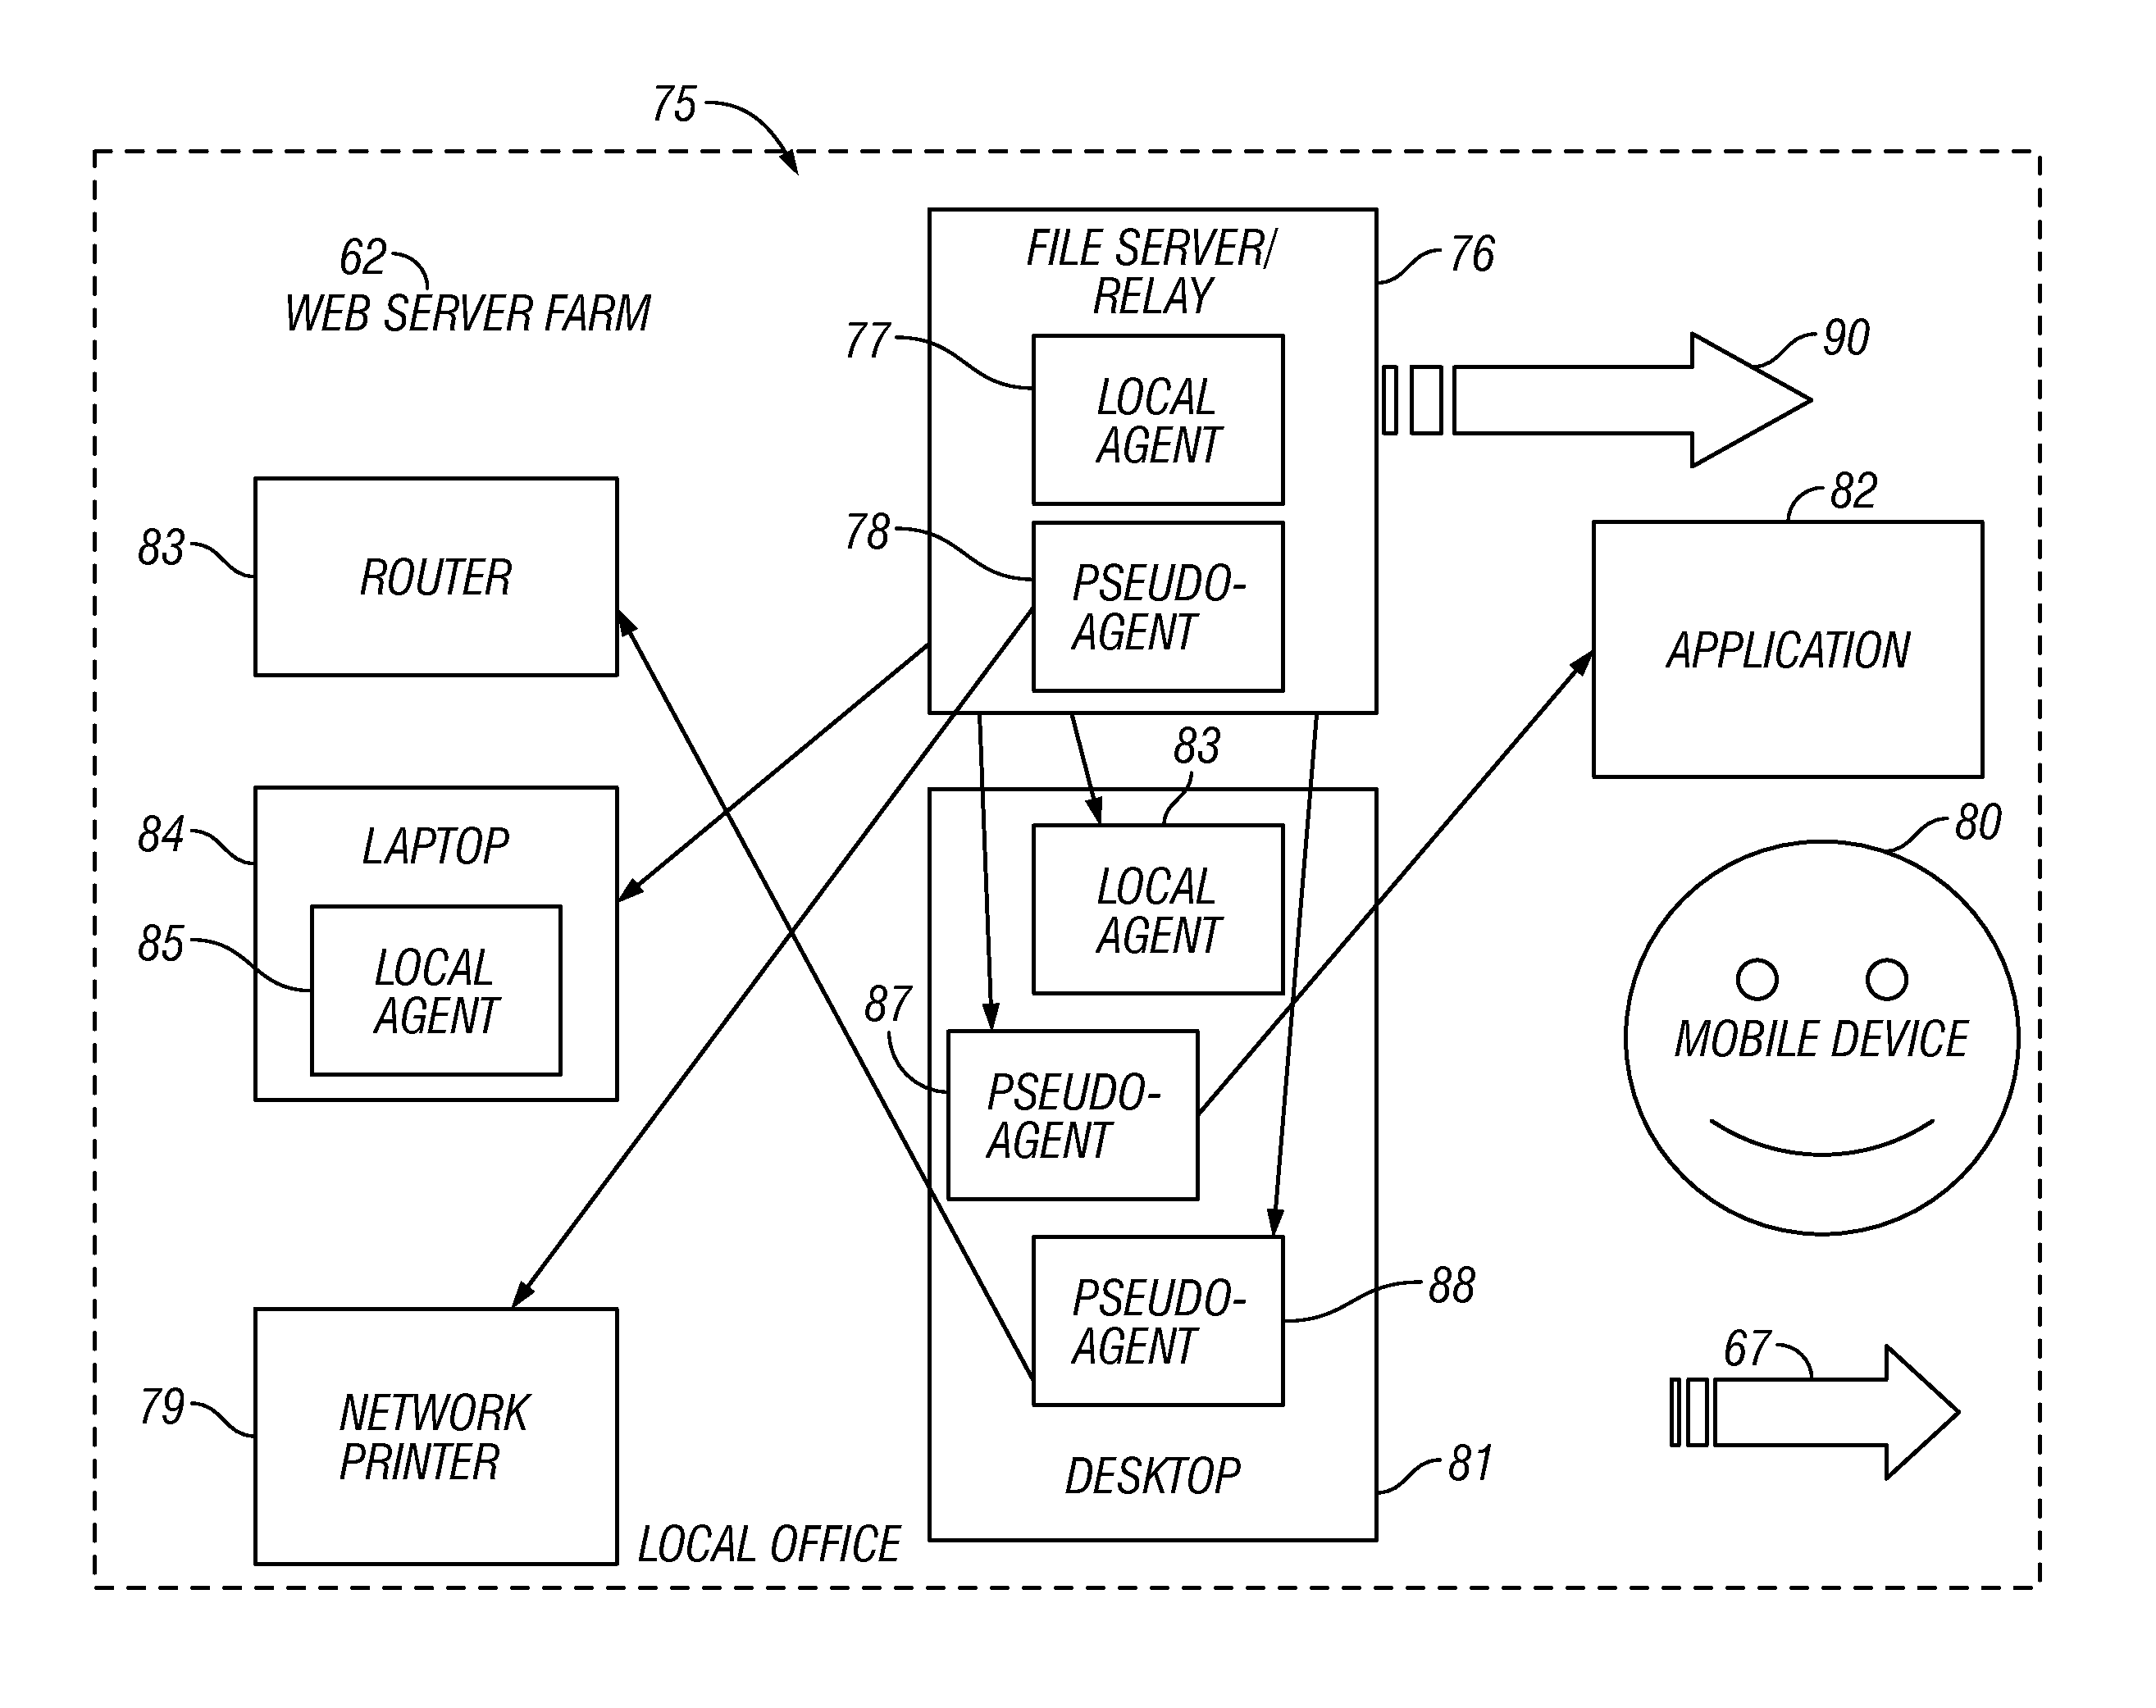 Method and apparatus for distributed policy-based management and computed relevance messaging with remote attributes